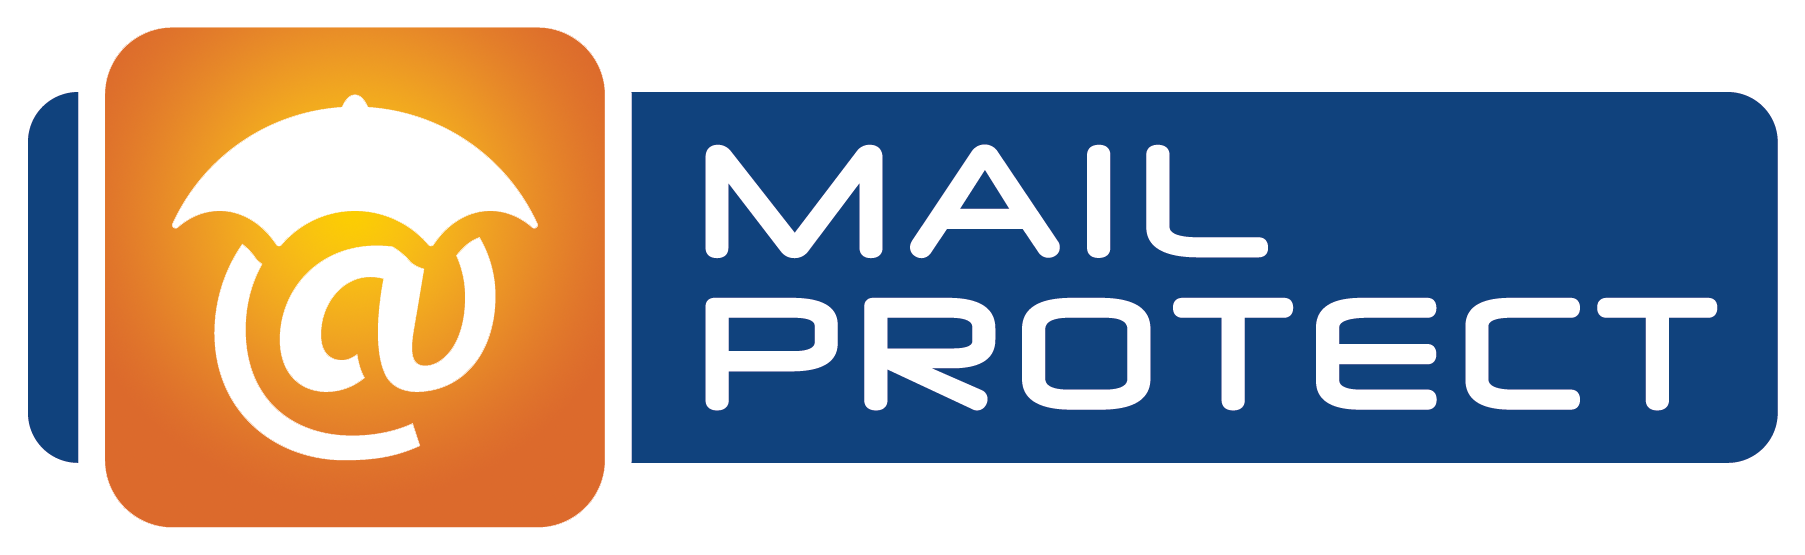 BCC MailProtect product logo